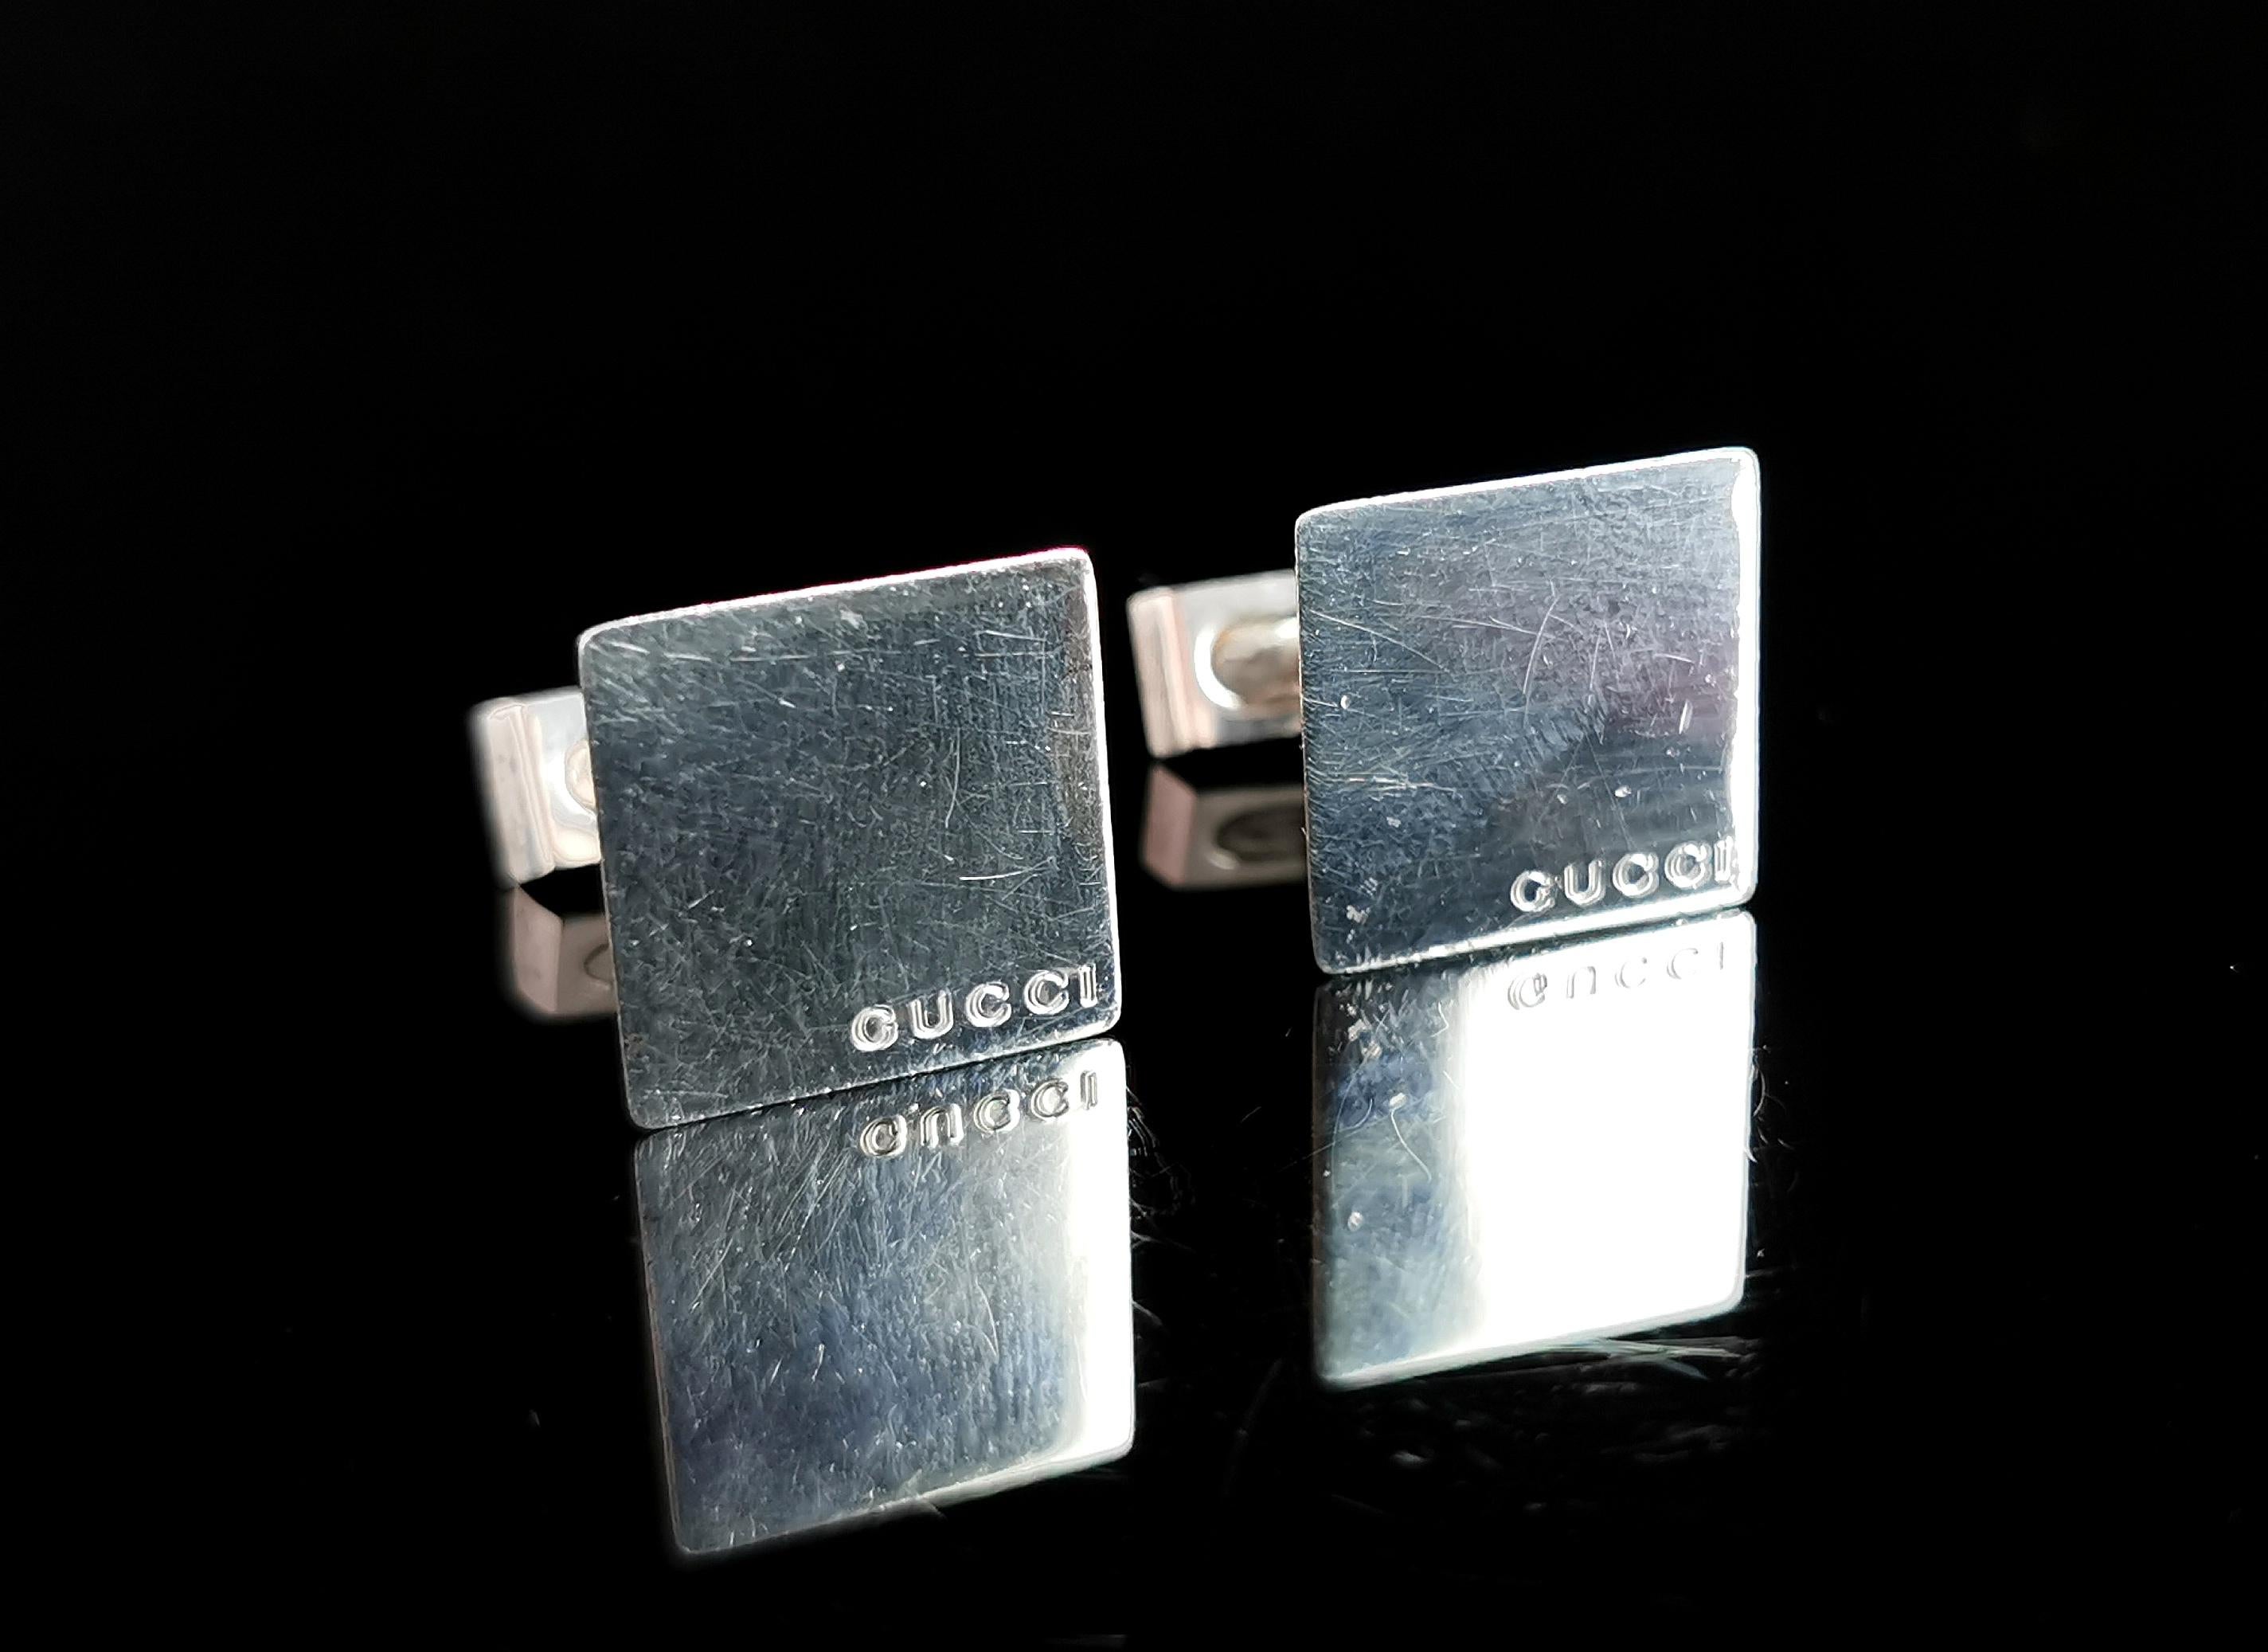 An attractive pair of vintage Gucci sterling silver cufflinks.

Nice chunky cufflinks these are quite heavy with a square face featuring the Gucci brand name engraved to each corner.

They are made from solid sterling silver and are marked 925 for